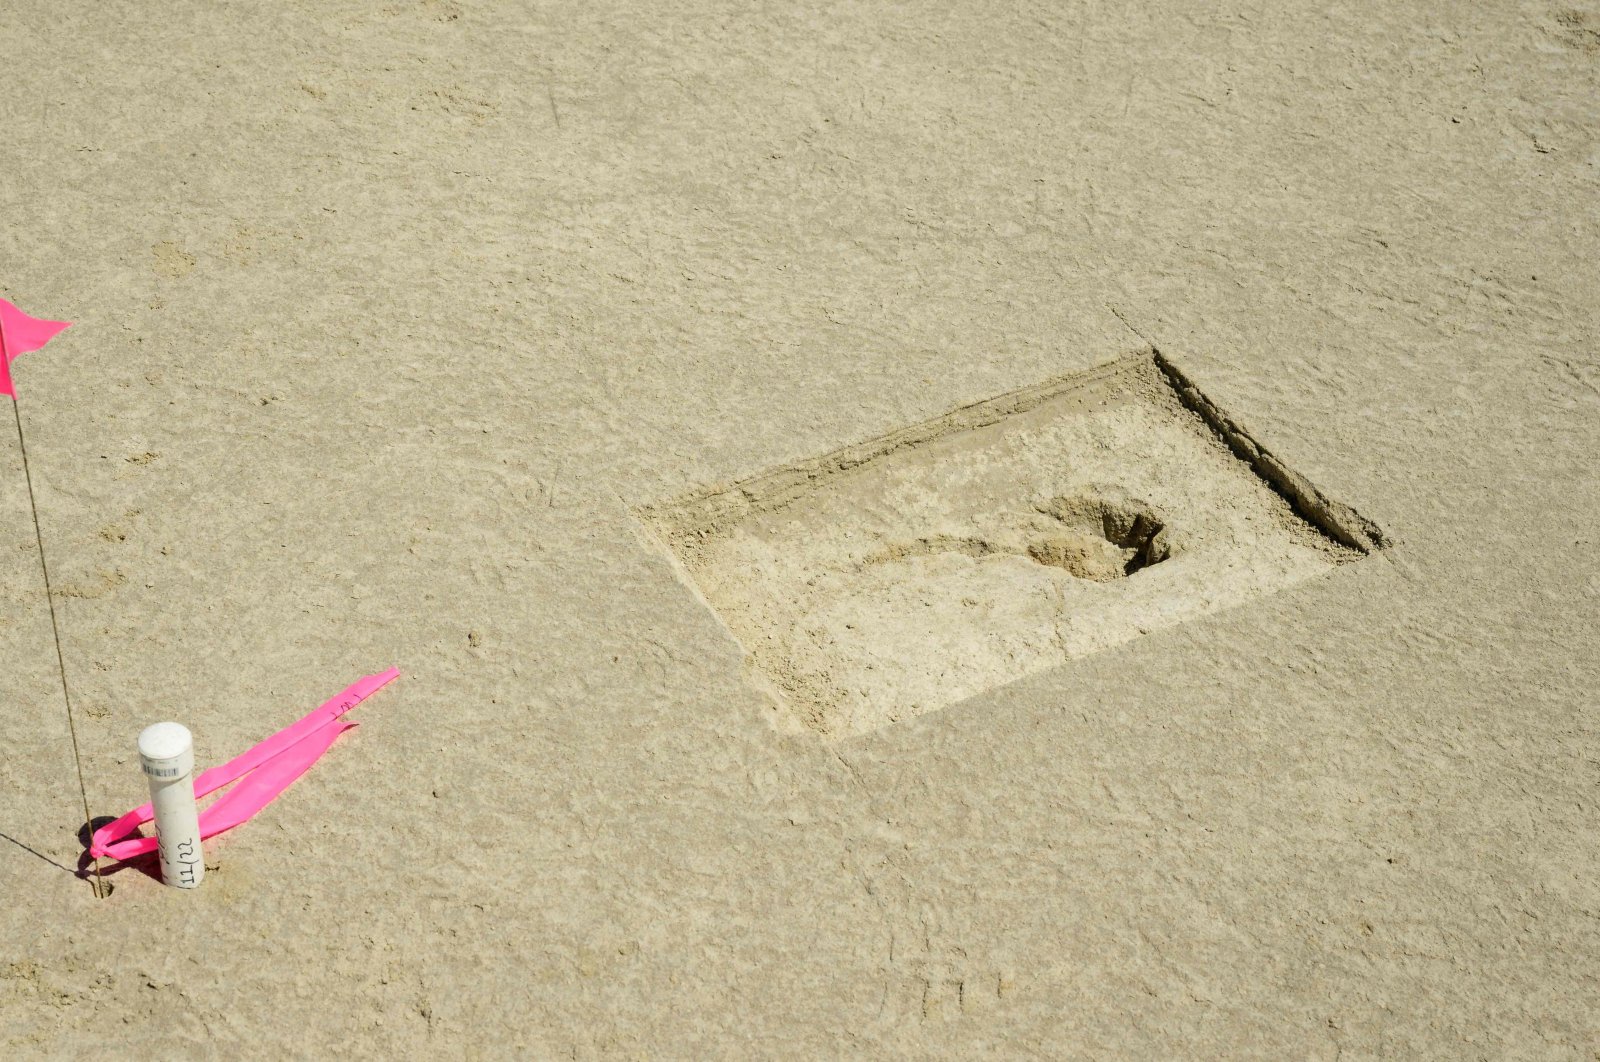 A footprint discovered on an archaeological site marked with a pin flag on the Utah Test and Training Range, Utah, U.S., July 18, 2022. (U.S. Airforce via AFP)